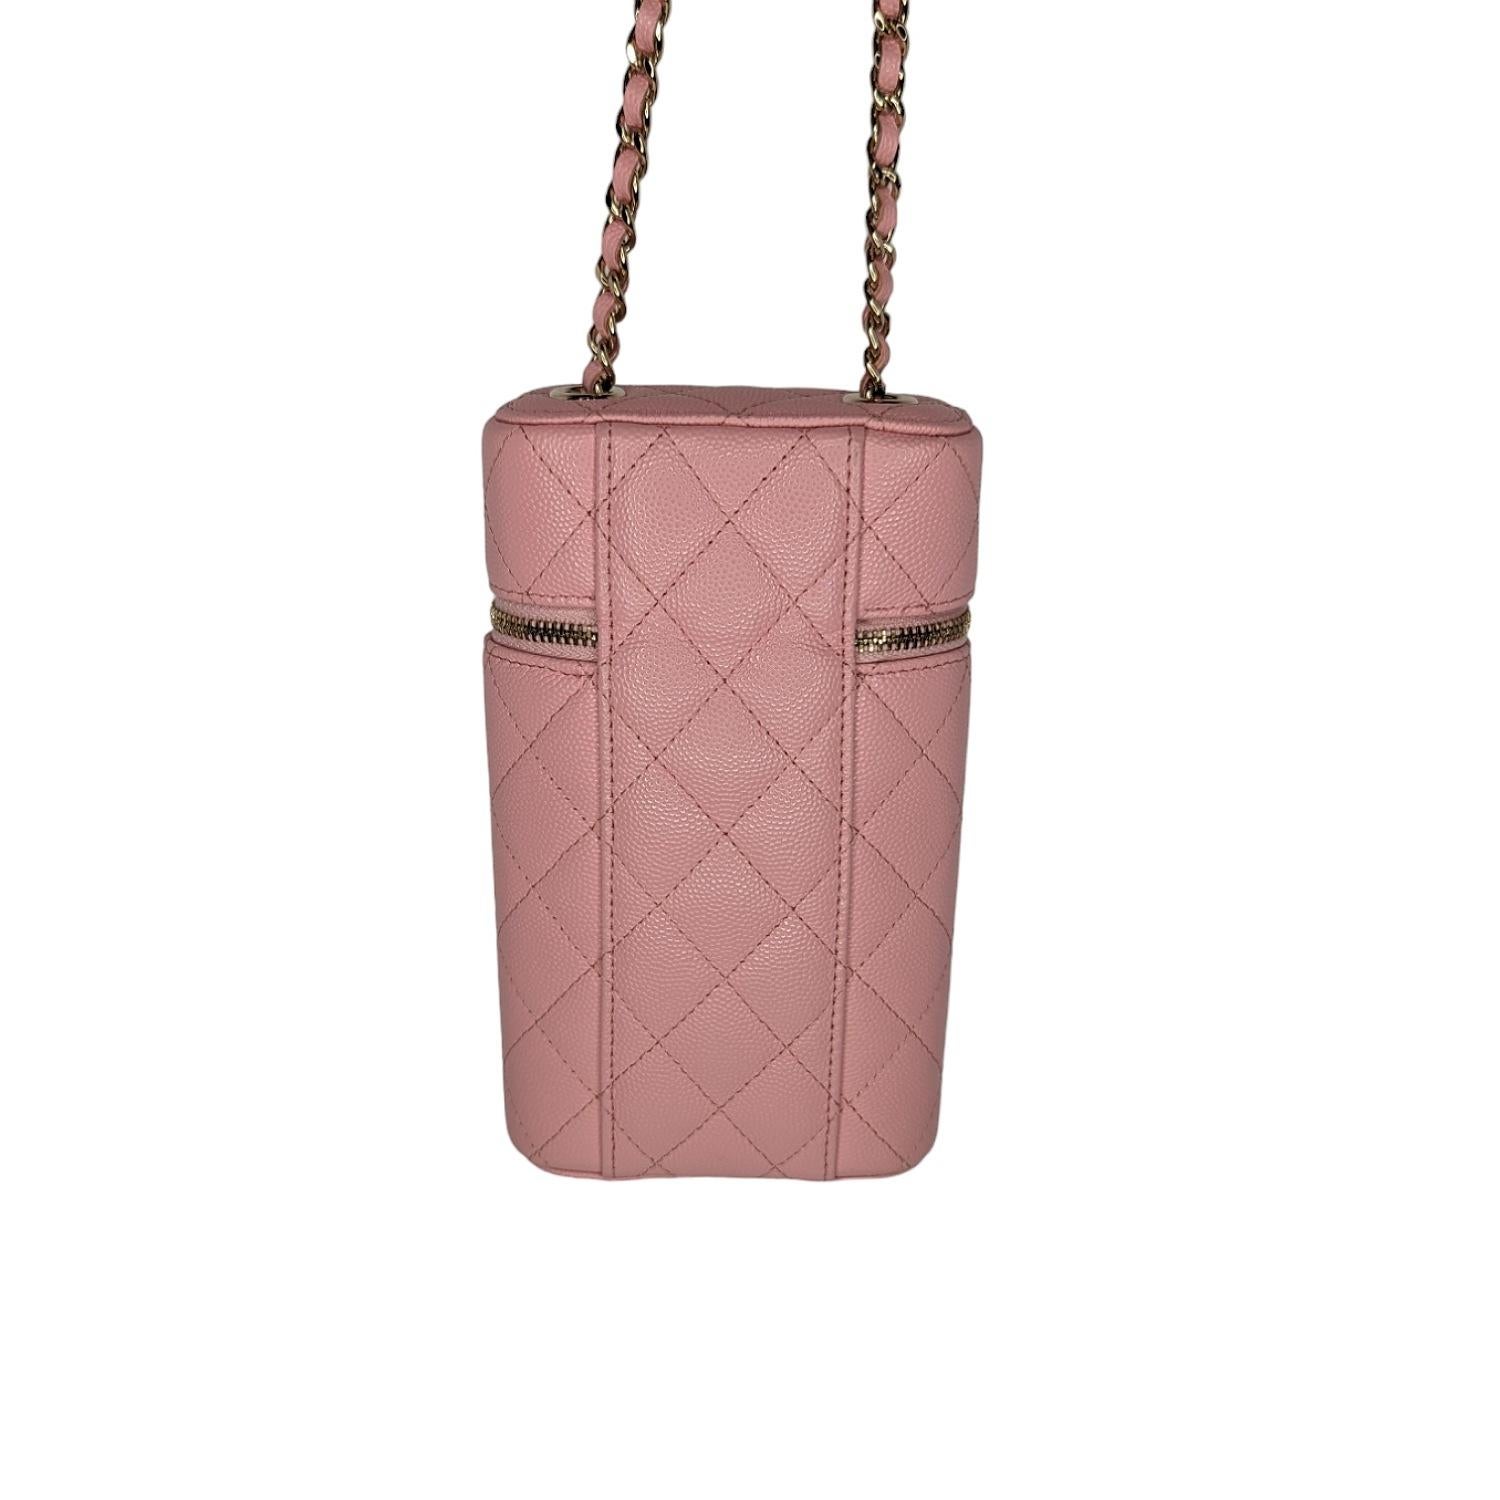 This chic bag is crafted of luxurious diamond quilted leather in bubble gum pink. It features a leather threaded gold chain link shoulder strap and a gold CC logo on the front. The top zipper opens to a matching fabric interior.

Designer: